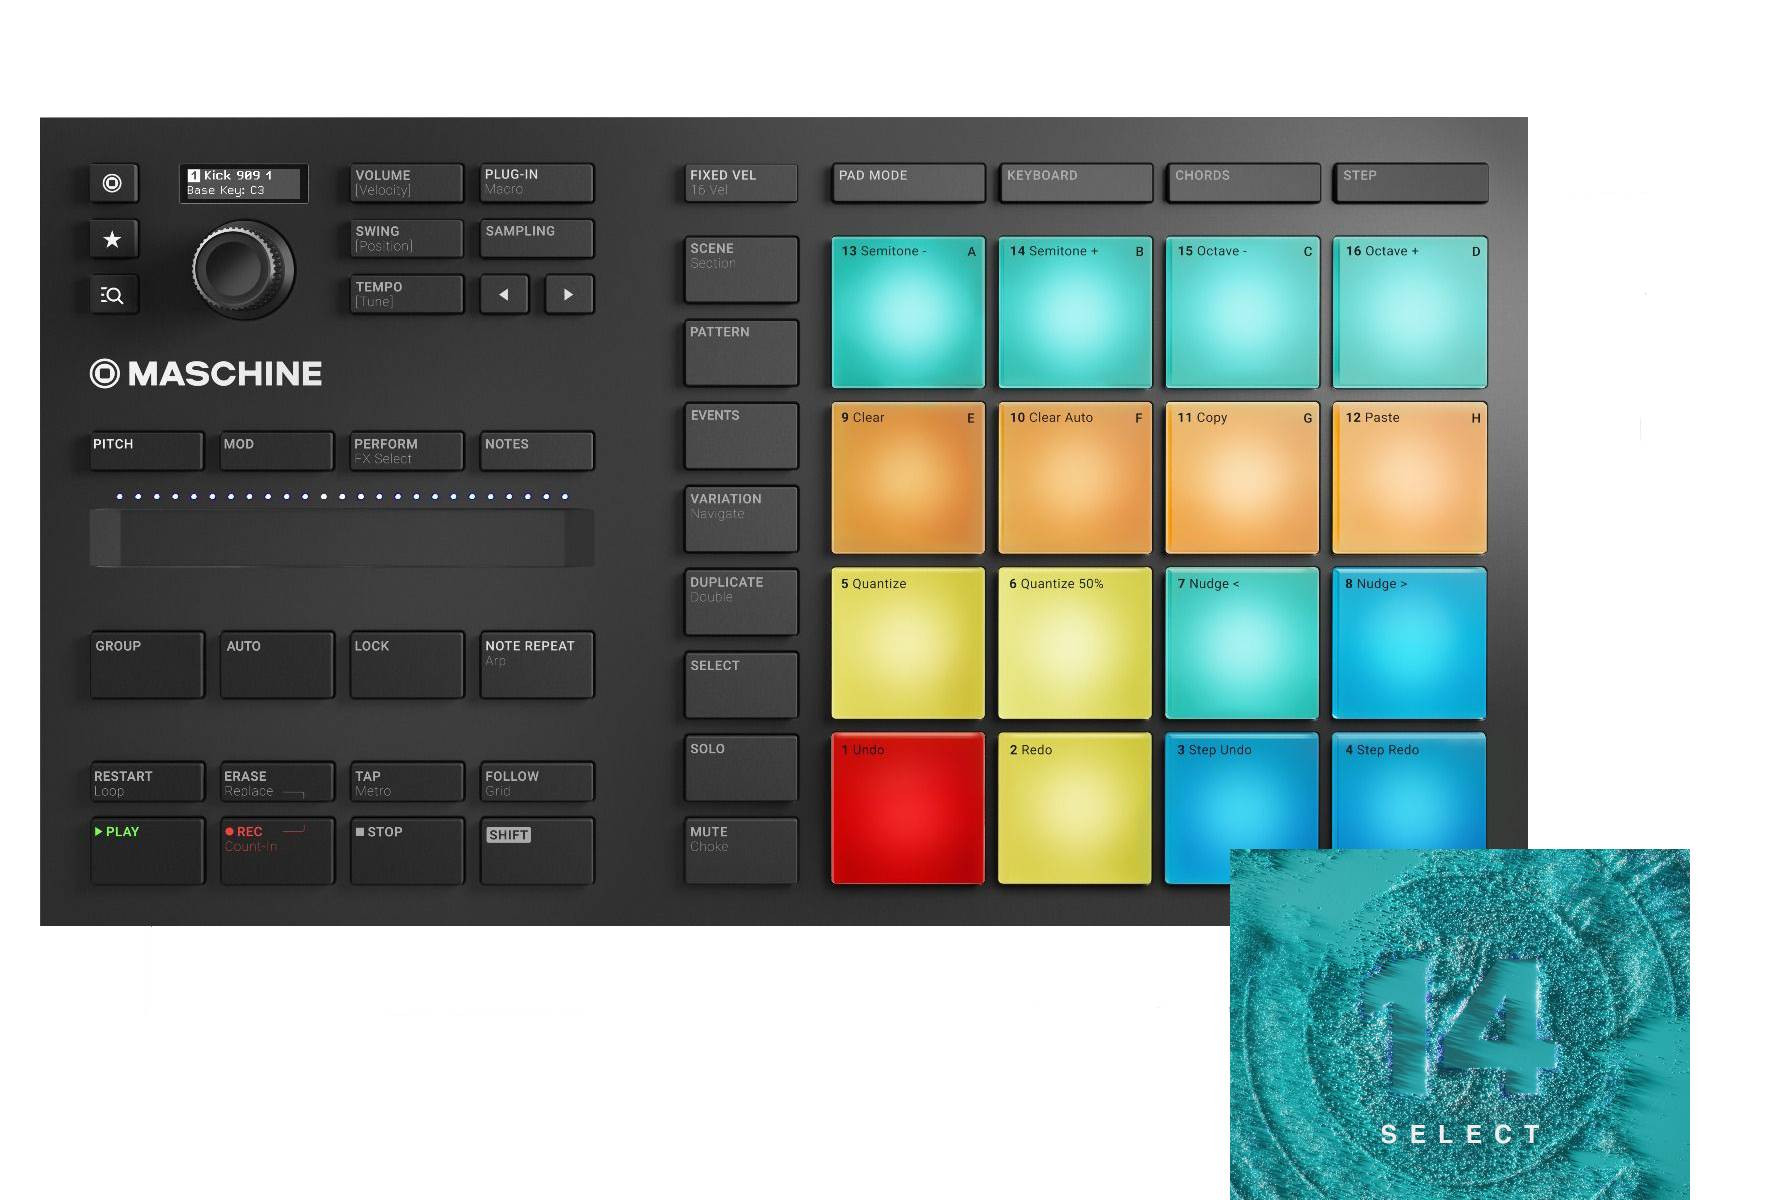 NATIVE INSTRUMENTS MASCHINE MIKRO MK3 + KOMPLETE 14 SELECT Upgrade for Collections DL